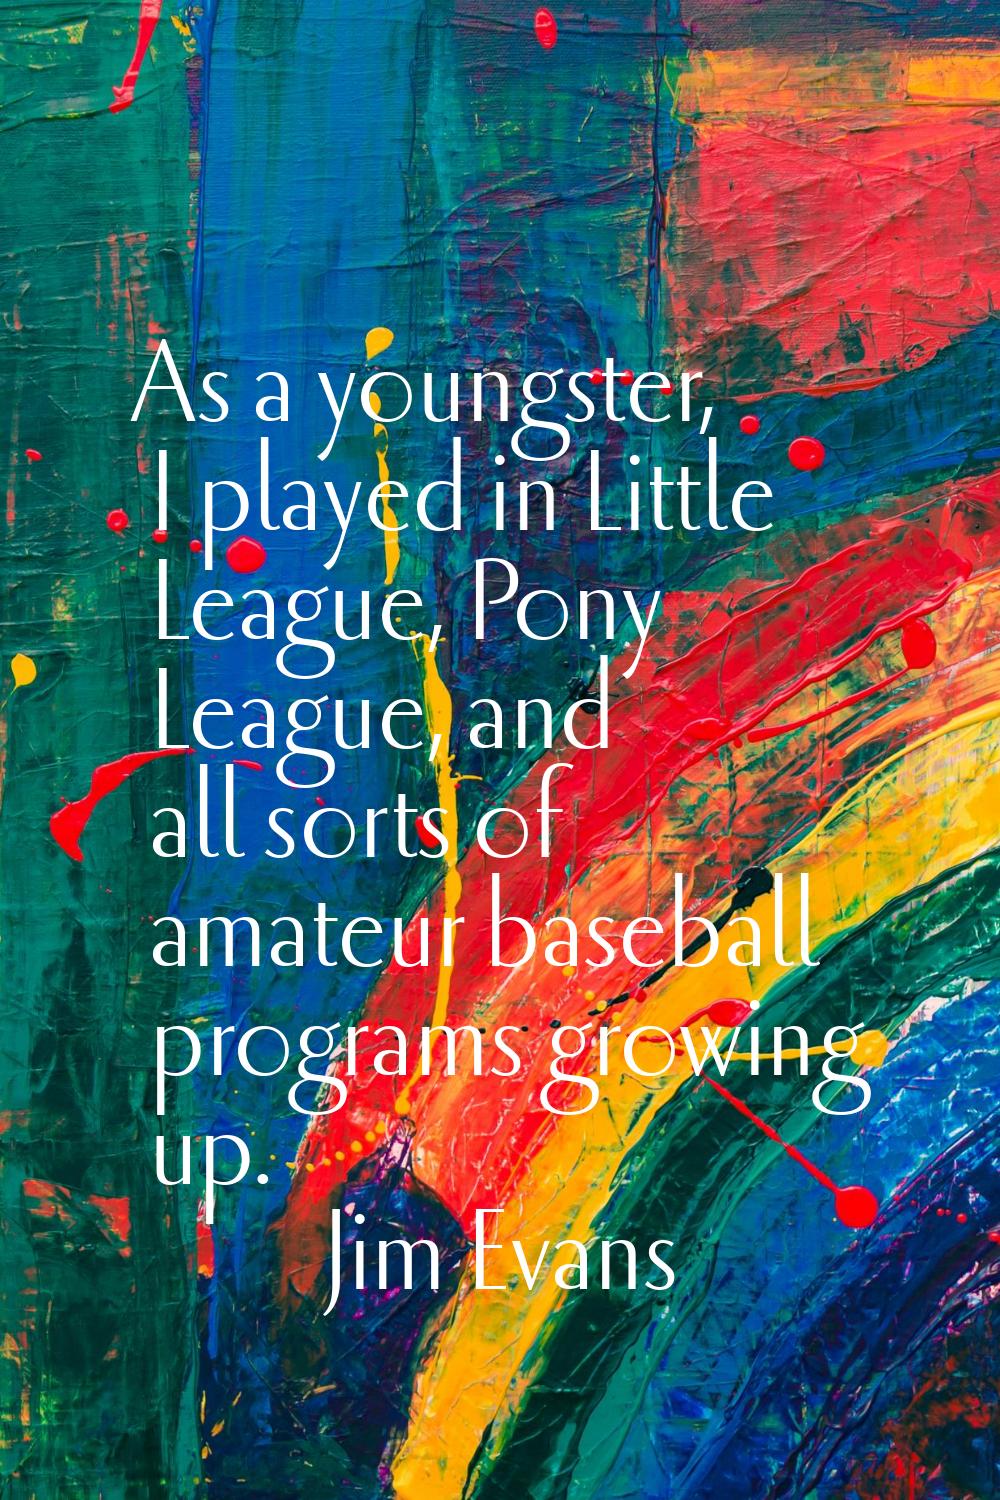 As a youngster, I played in Little League, Pony League, and all sorts of amateur baseball programs 